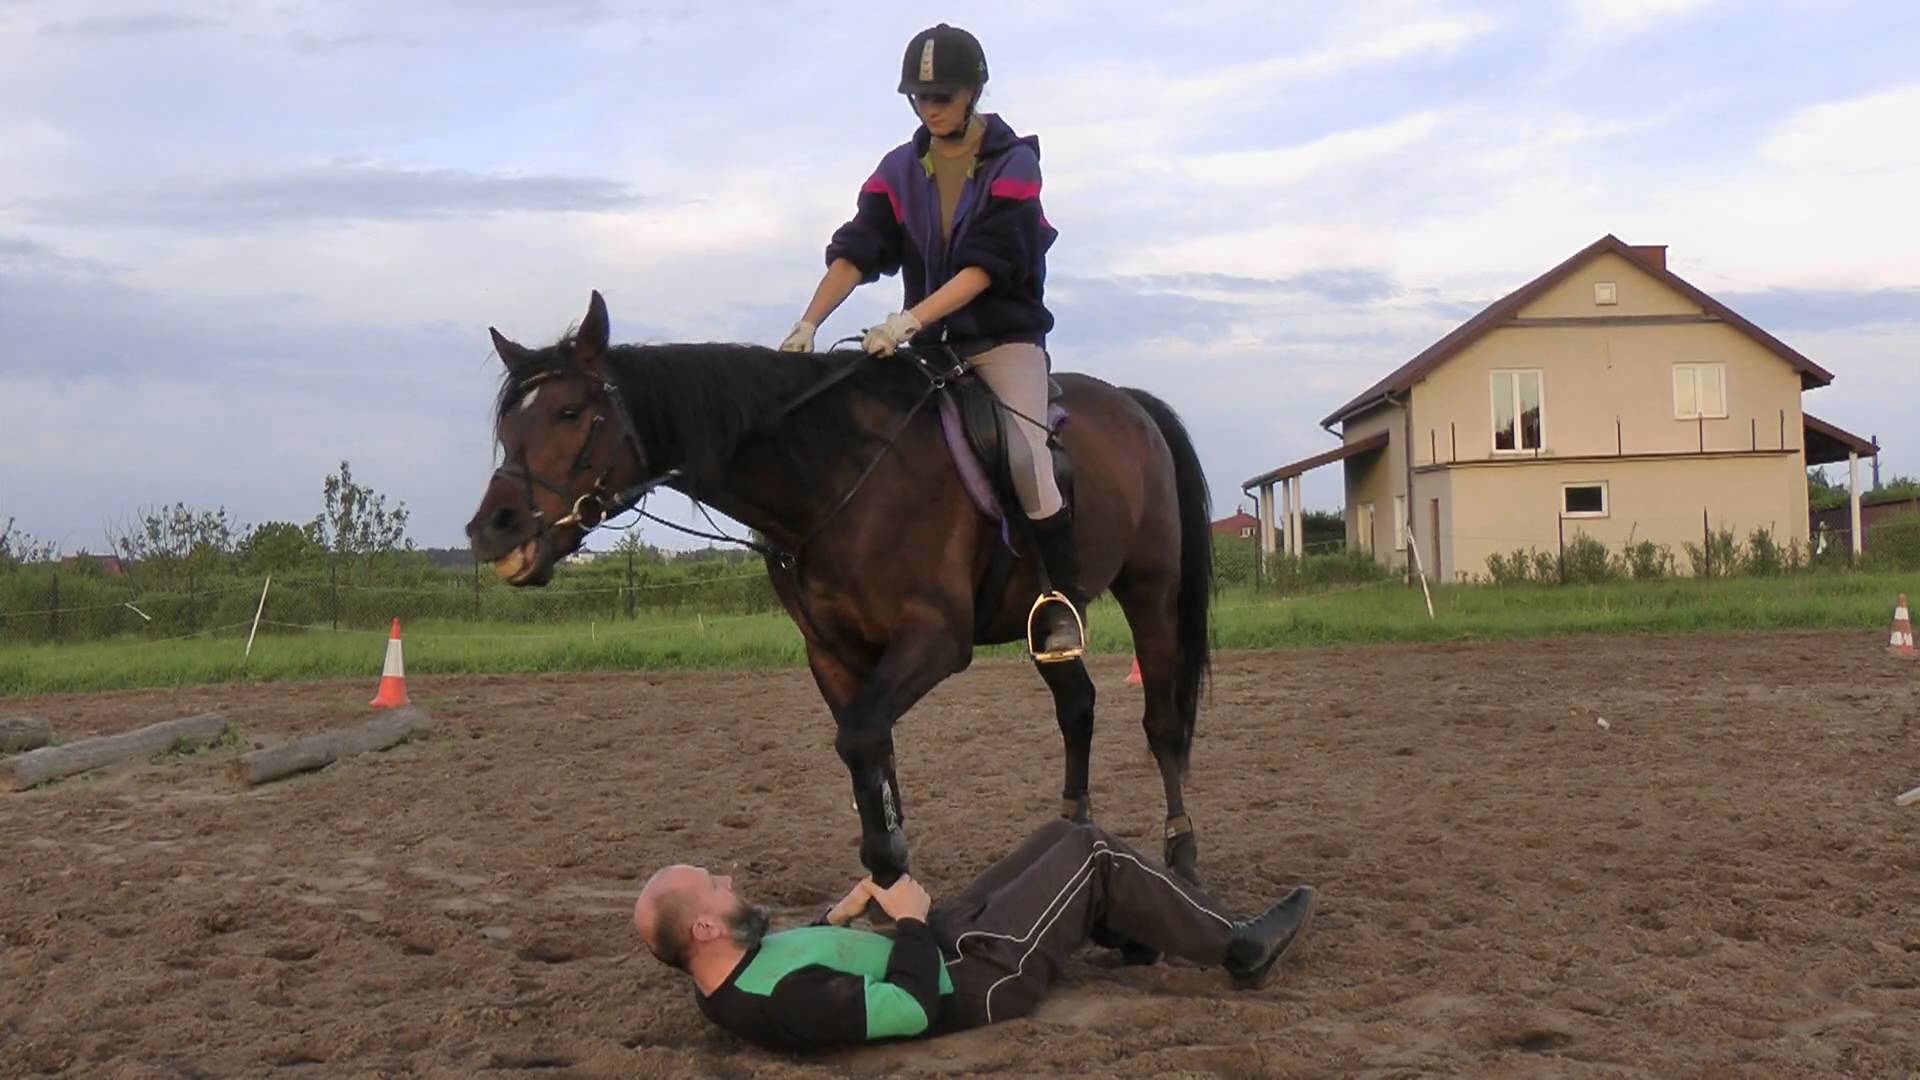 Under weight of horse and rider - YouTube